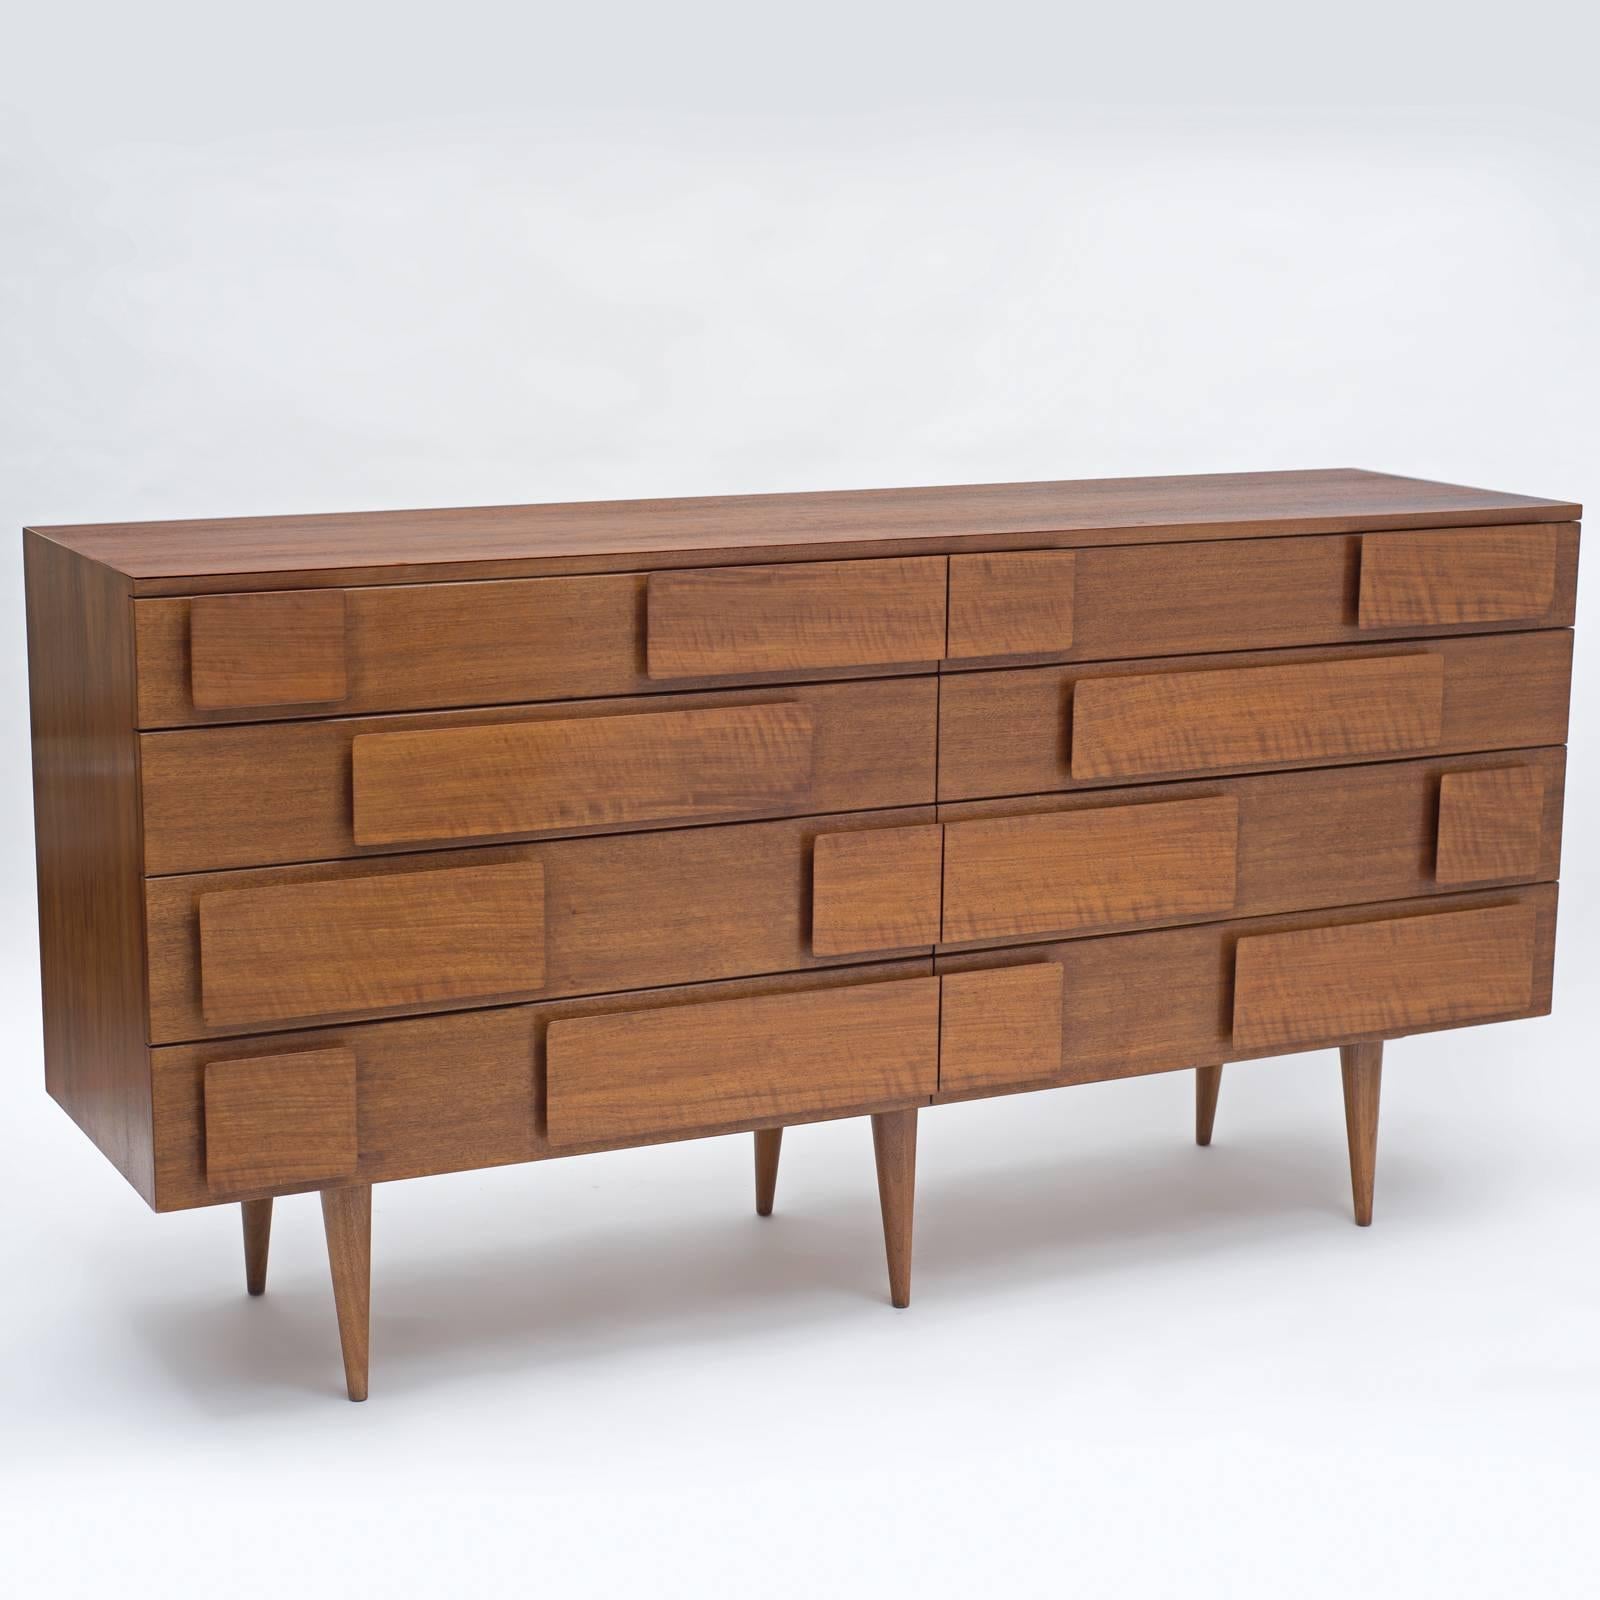 A Classic Gio Ponti simple and elegant design. A very spacious dresser with the original dividers and jewelry tray.